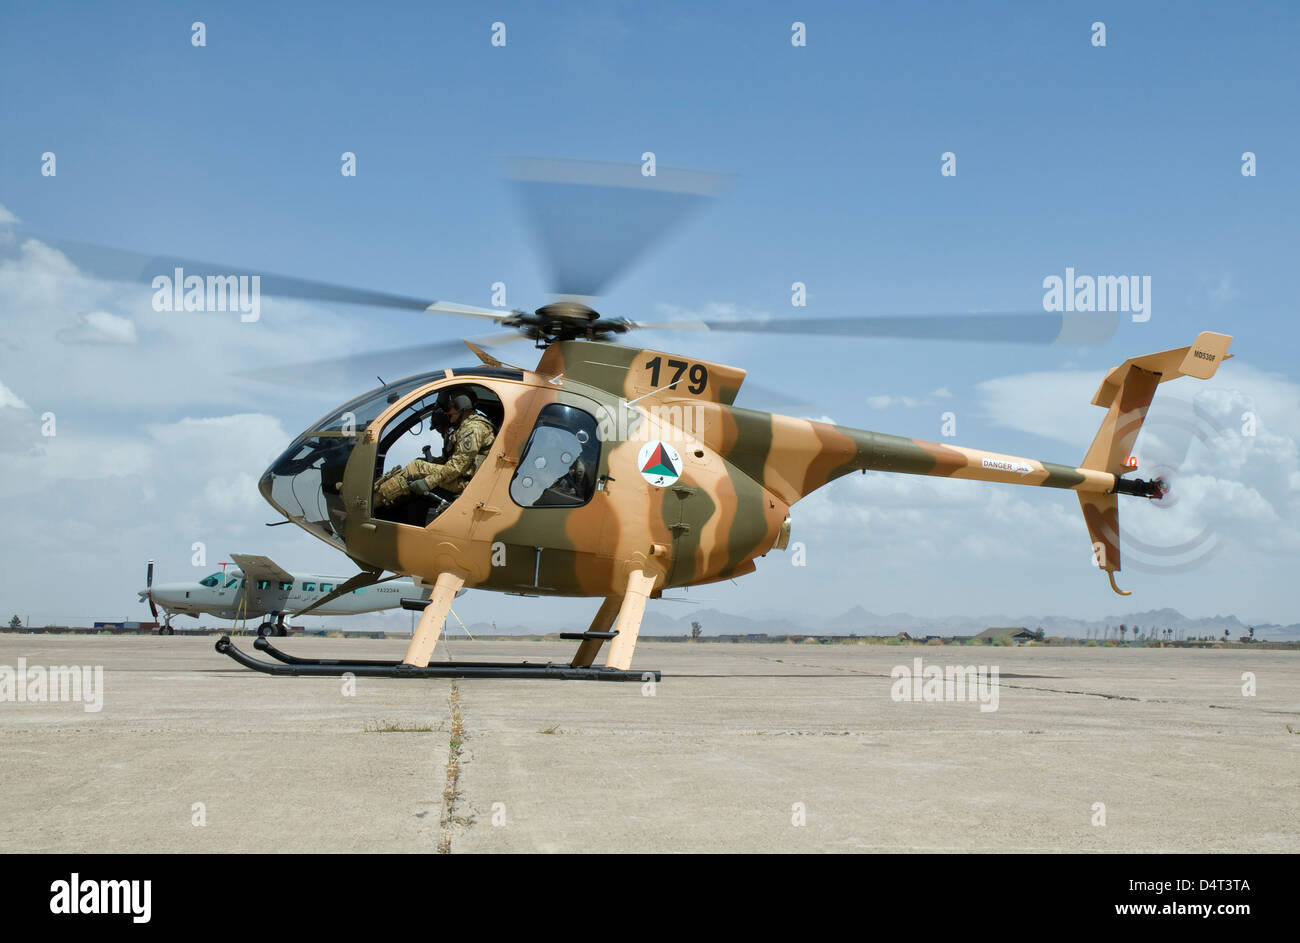 An Afghan Air Force MD-530F helicopter ready to take off on the ramp at Shindand Air Base, Afghanistan. Stock Photo